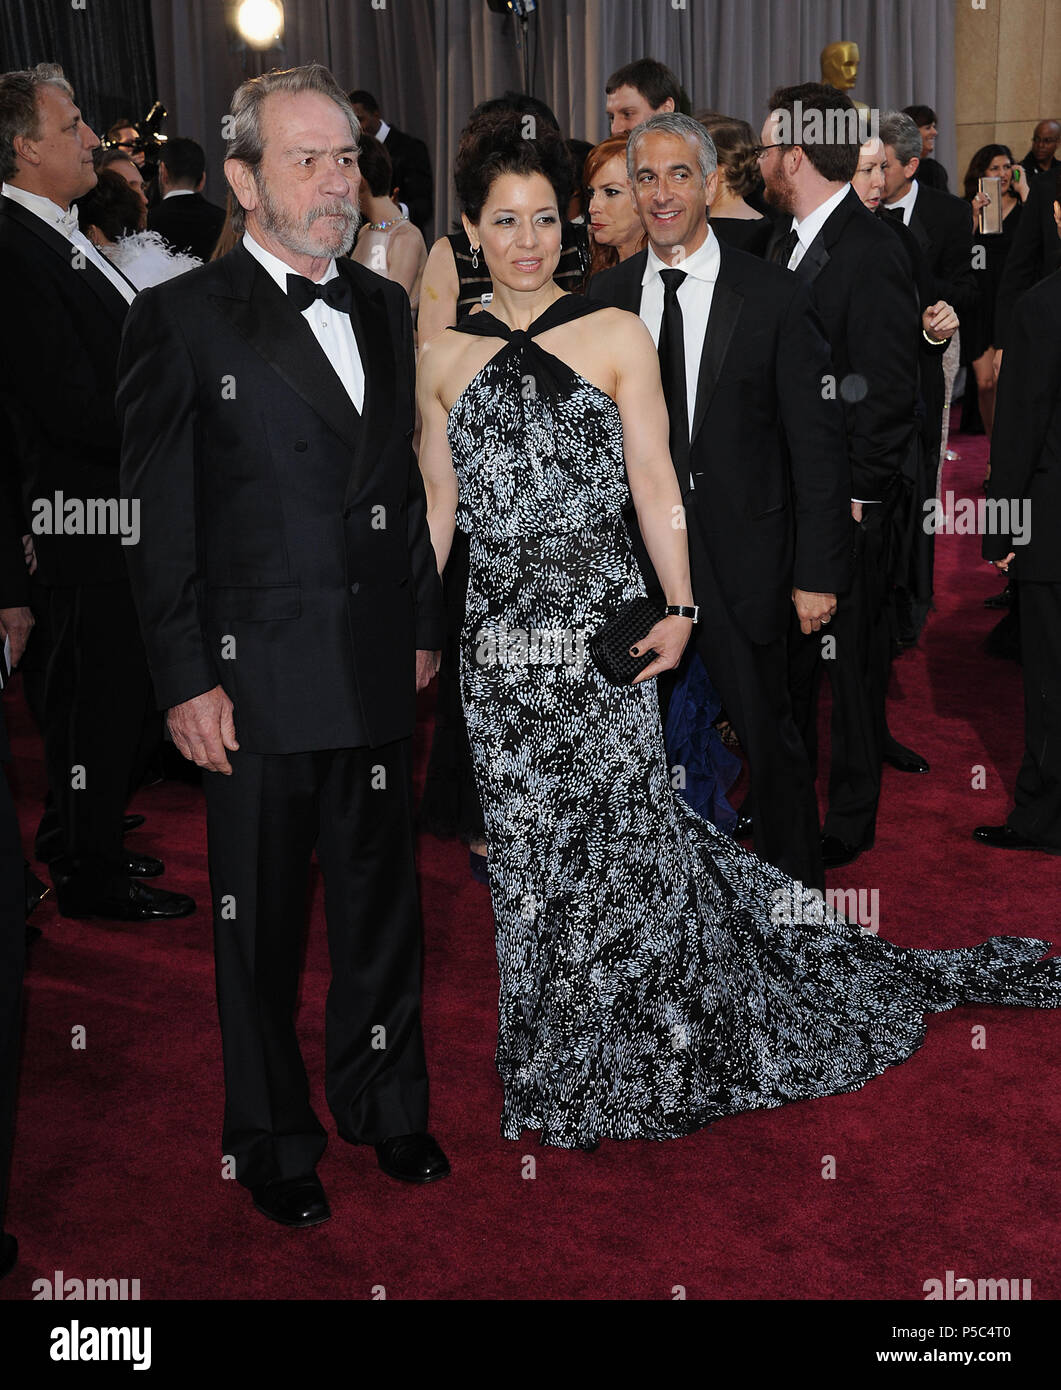 Tommy Lee Jones and wife 160  arriving at the 85th Academy Awards 2013 - Oscars - at the Dolby Theatre in Los Angeles.Tommy Lee Jones and wife 160  ------------- Red Carpet Event, Vertical, USA, Film Industry, Celebrities,  Photography, Bestof, Arts Culture and Entertainment, Topix Celebrities fashion /  Vertical, Best of, Event in Hollywood Life - California,  Red Carpet and backstage, USA, Film Industry, Celebrities,  movie celebrities, TV celebrities, Music celebrities, Photography, Bestof, Arts Culture and Entertainment,  Topix, vertical,  family from from the year , 2013, inquiry tsuni@Ga Stock Photo